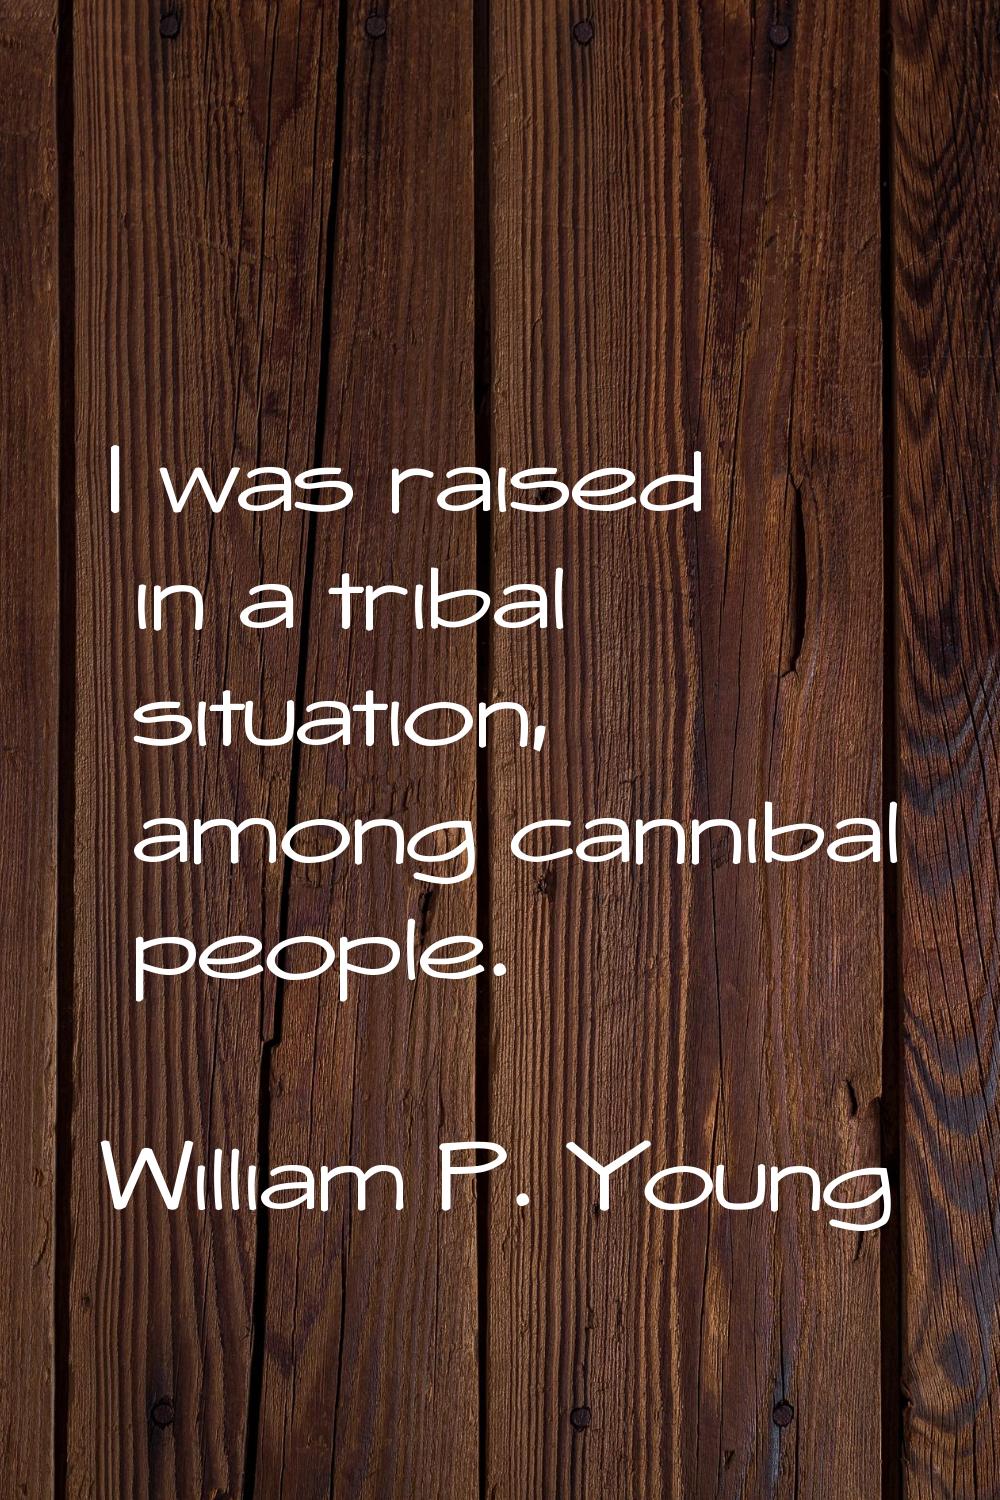 I was raised in a tribal situation, among cannibal people.